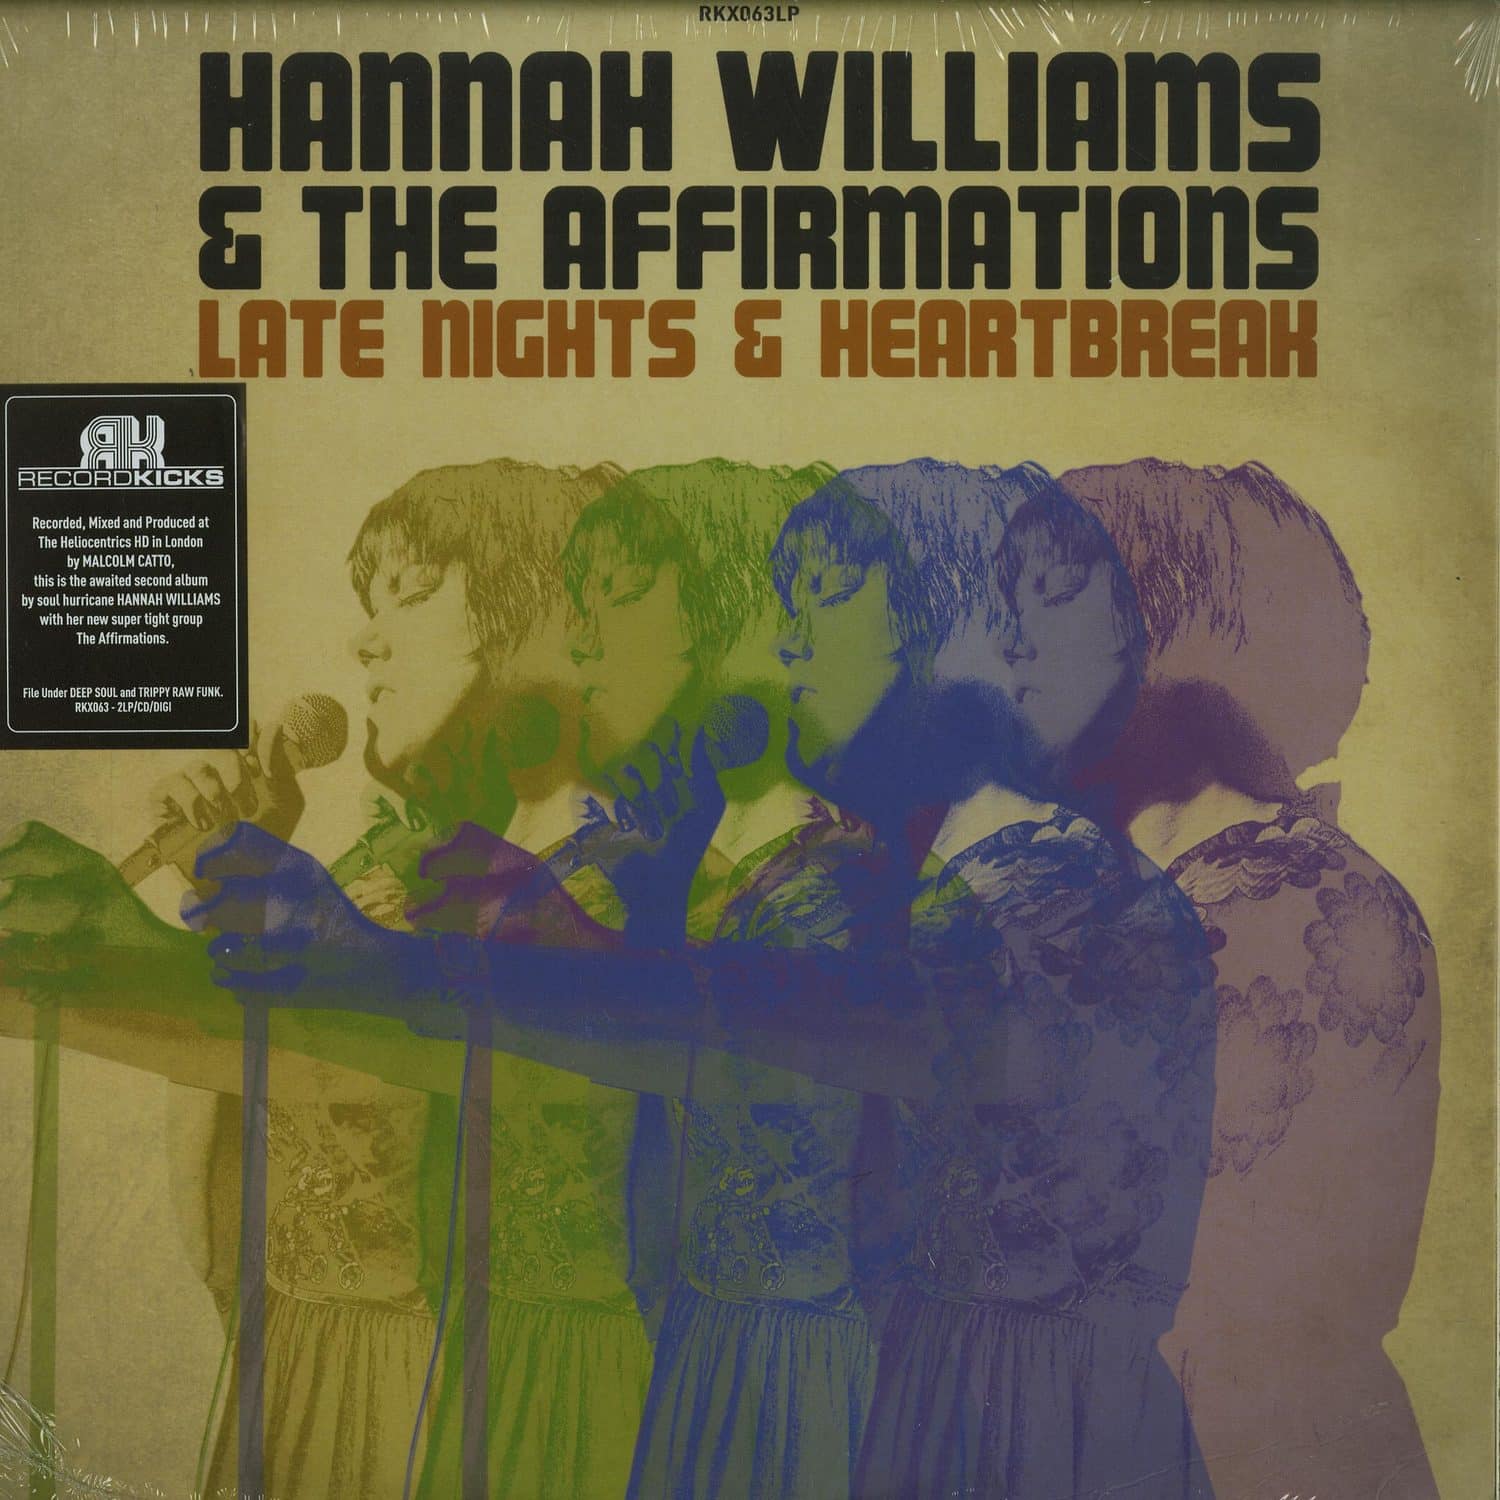 Hannah Williams & The Affirmations - LATE NIGHTS & HEARTBREAK 